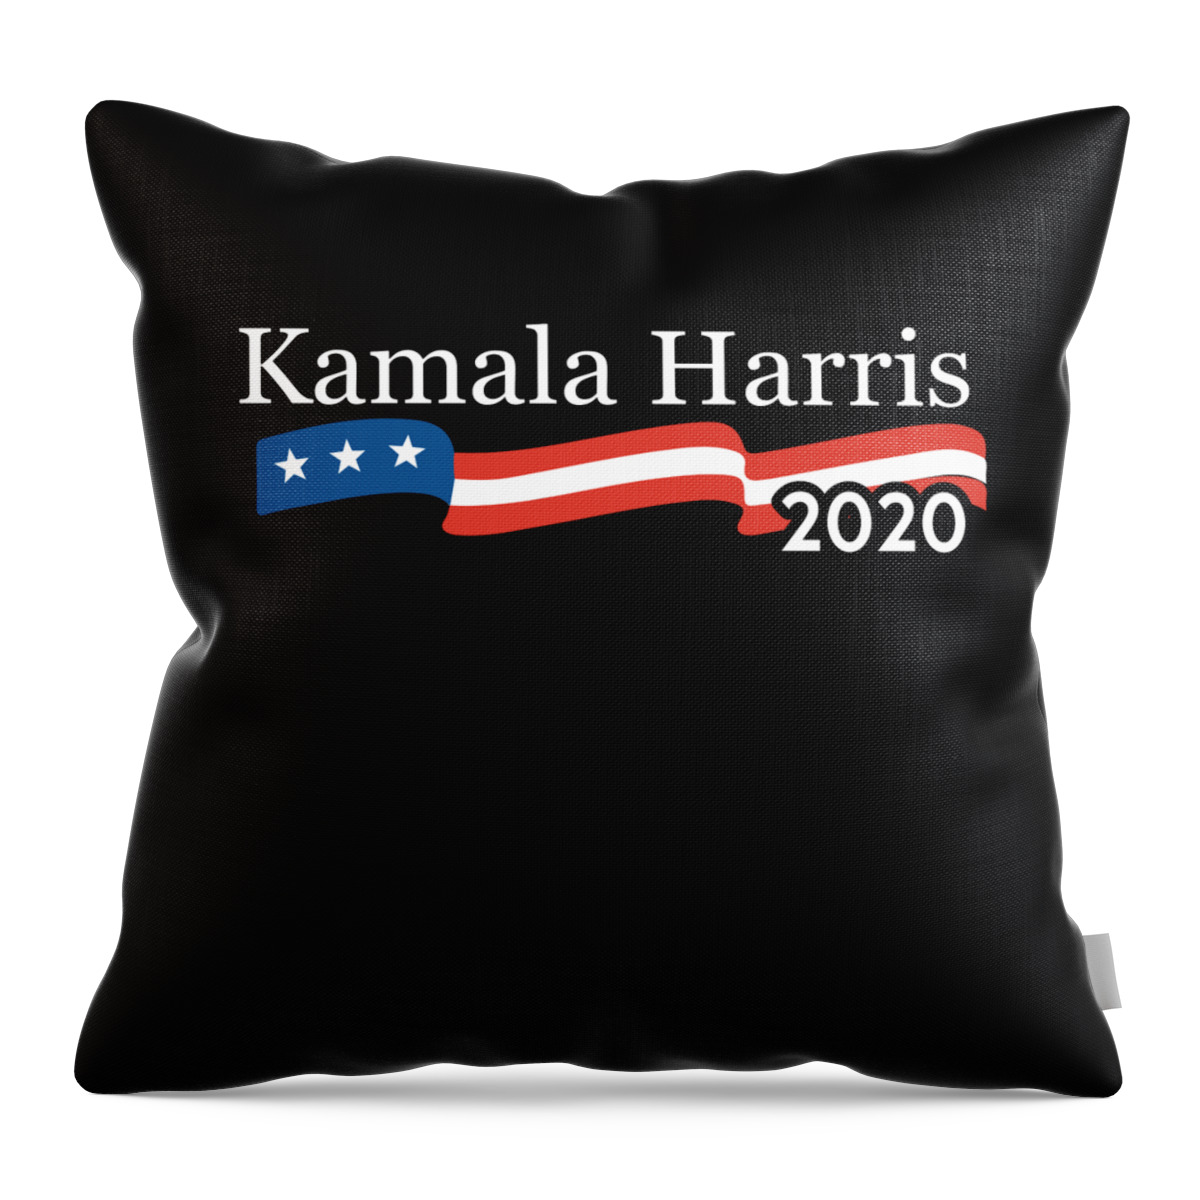 Cool Throw Pillow featuring the digital art Kamala Harris 2020 For President by Flippin Sweet Gear